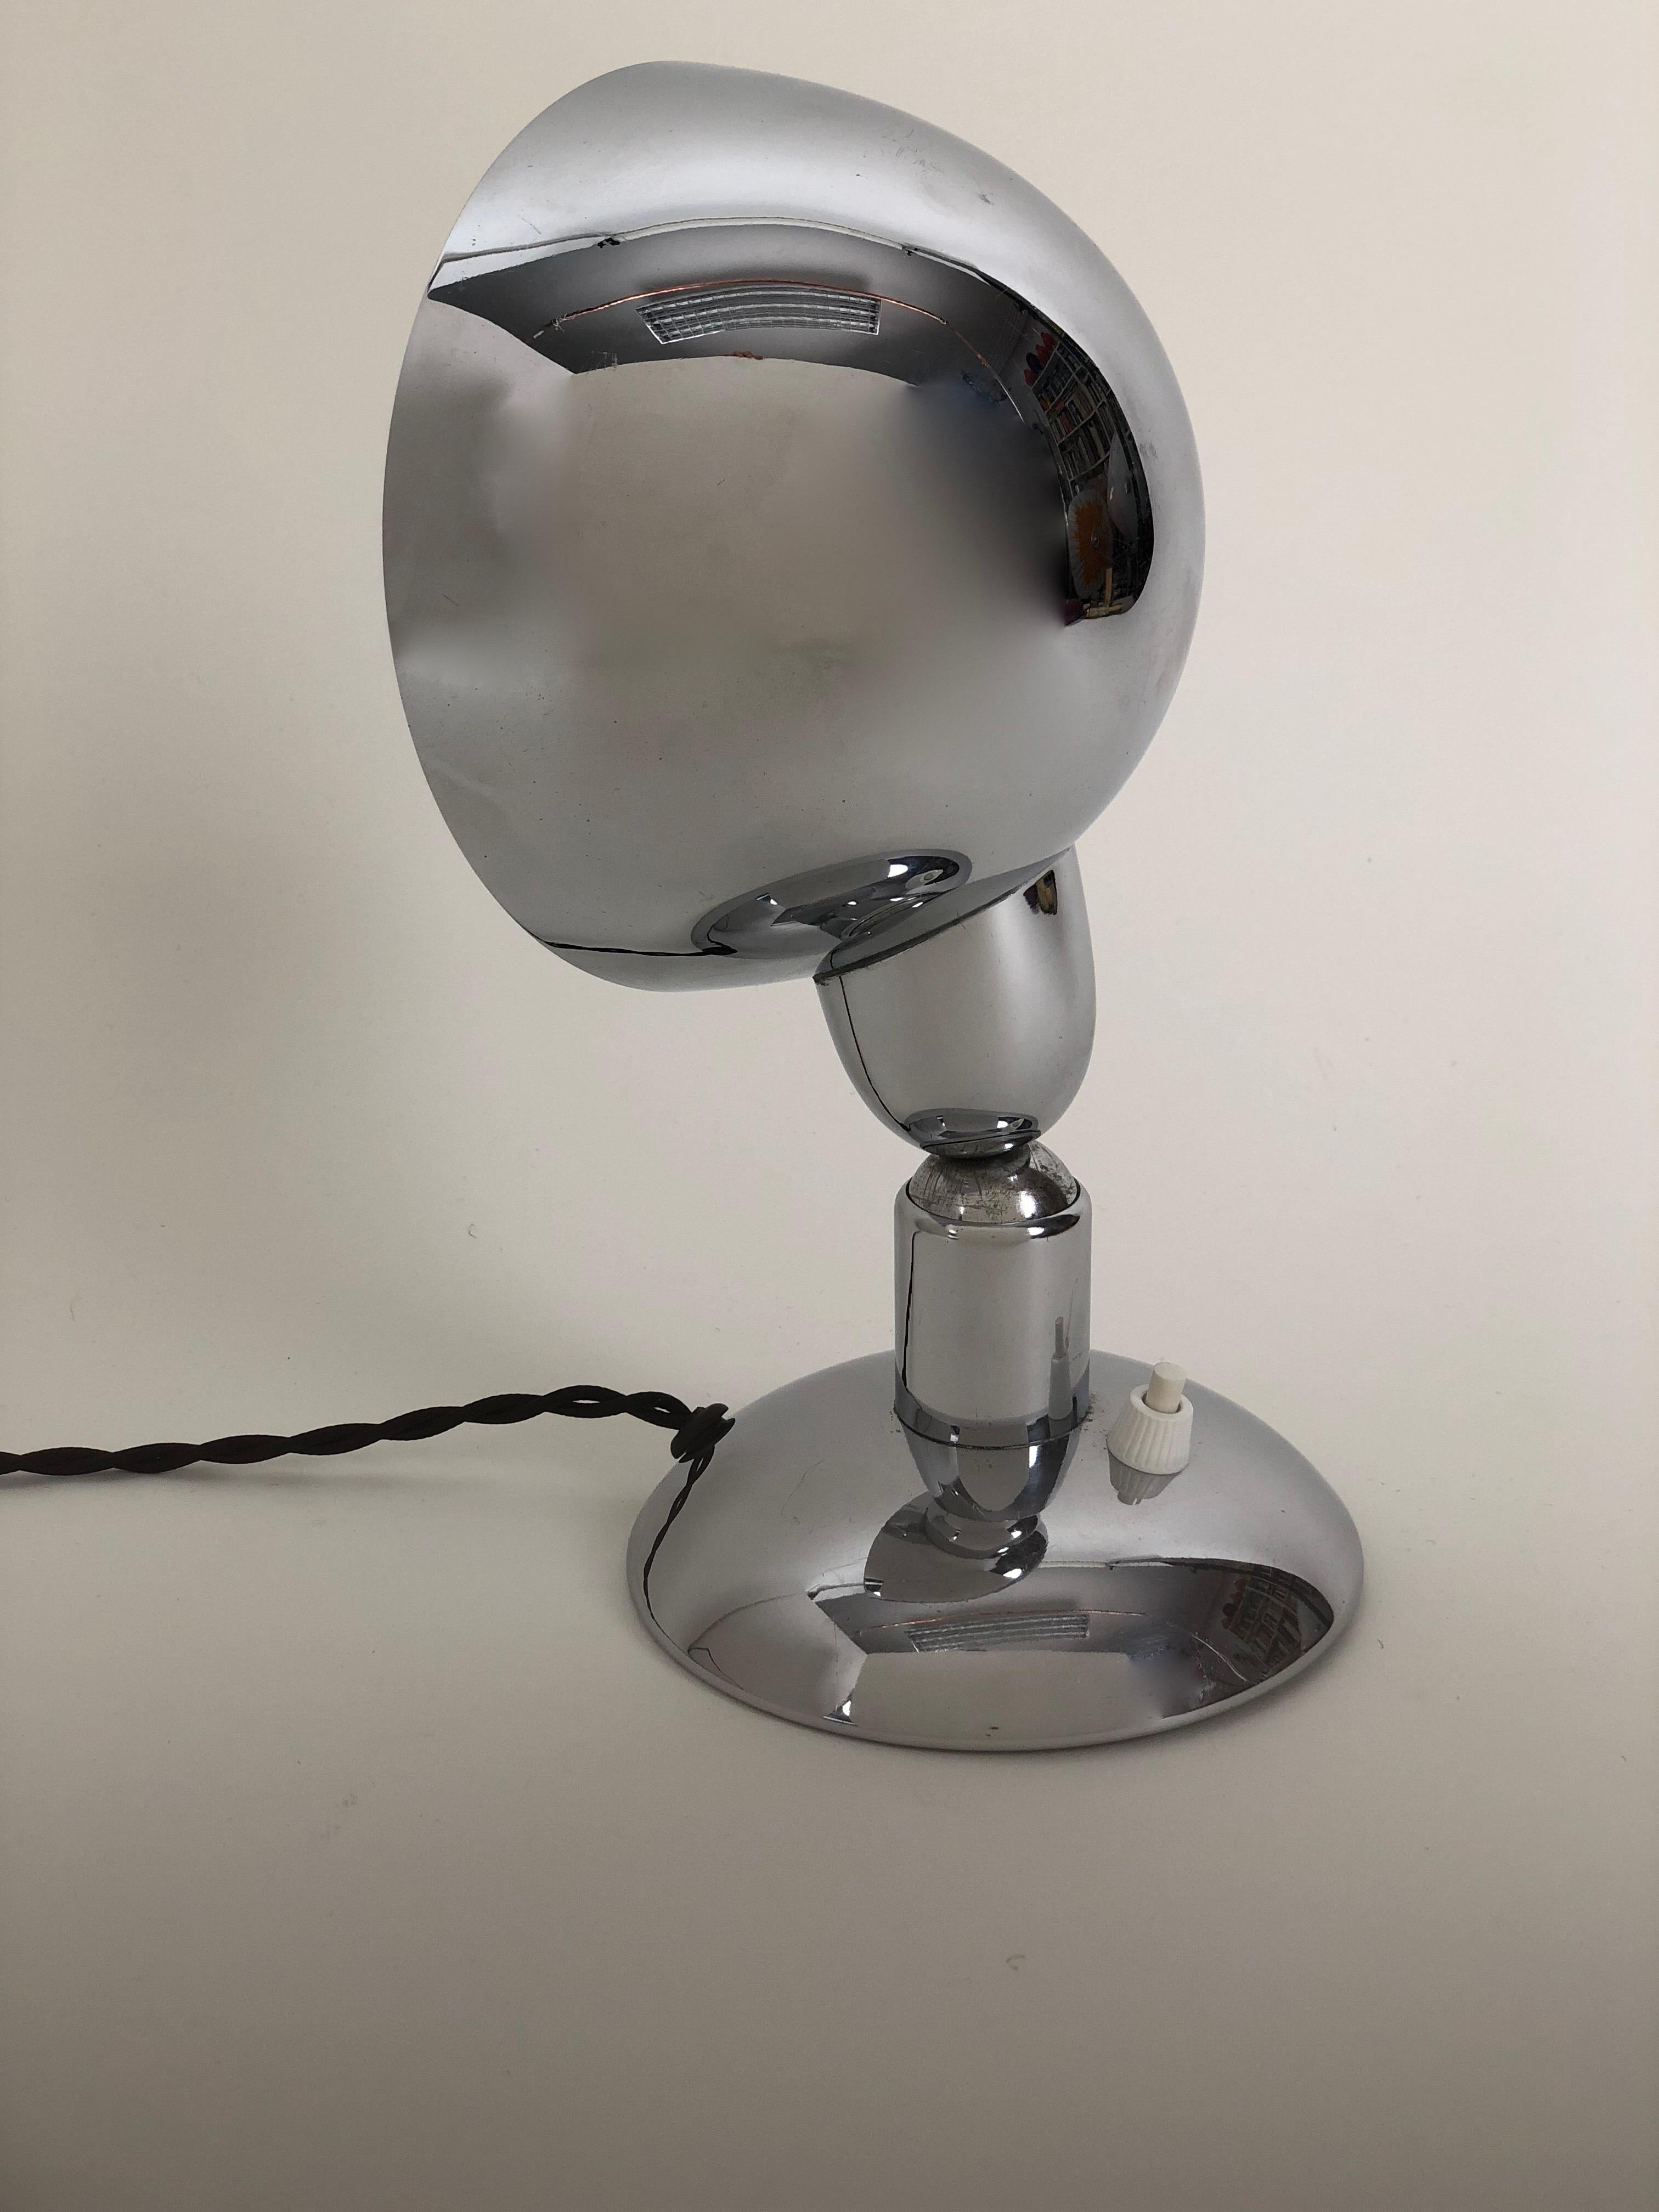 Metalwork WMF Ikora Table Lamp / Wall Reflector in Bauhaus Manner from the 1930s Chrome For Sale